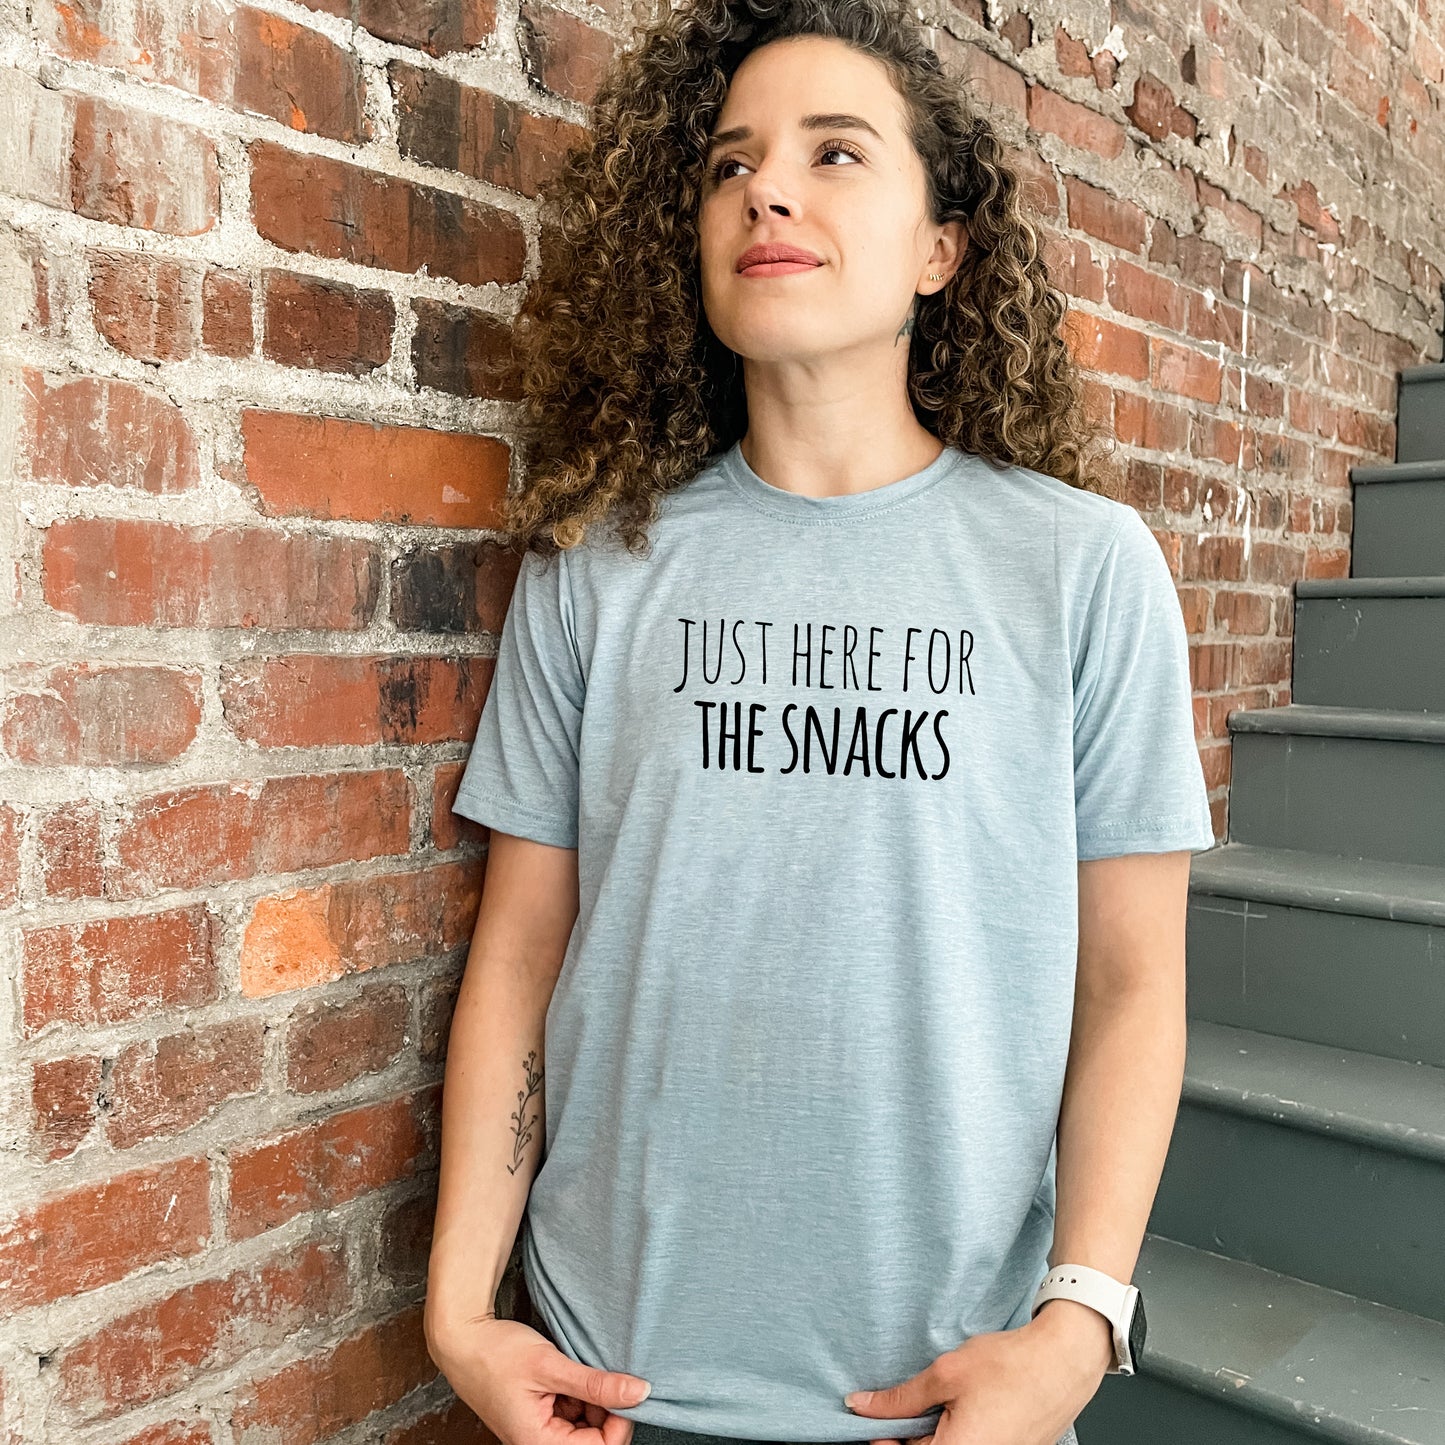 Just Here For The Snacks - Men's / Unisex Tee - Stonewash Blue or Sage